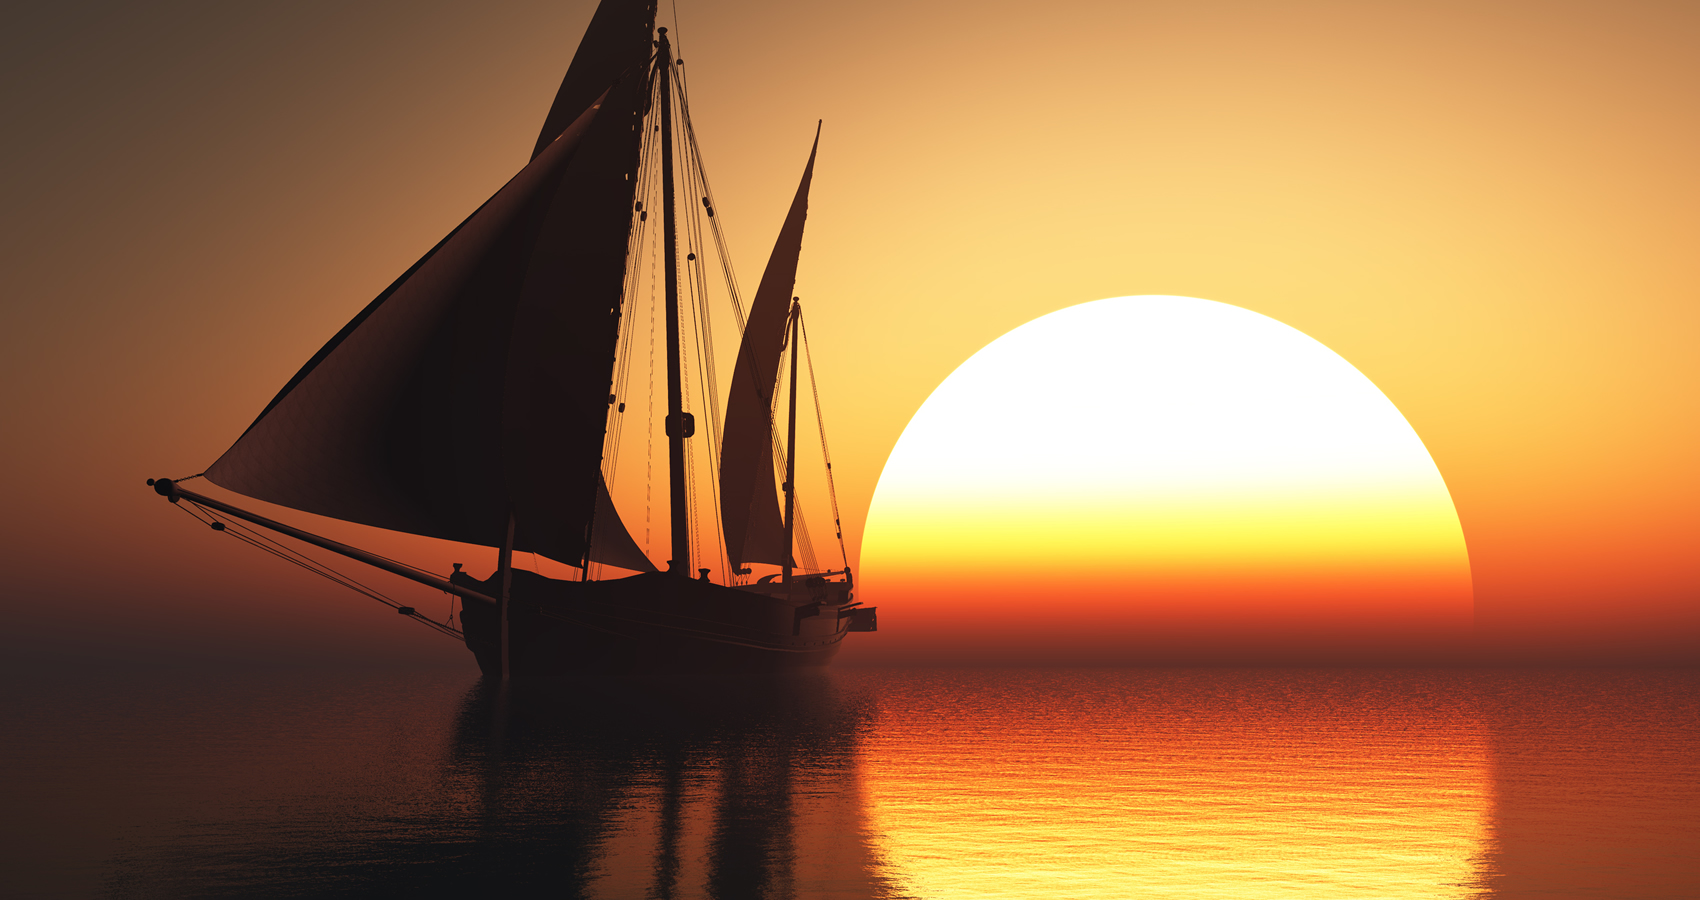 sail boat on the ocean at sunset